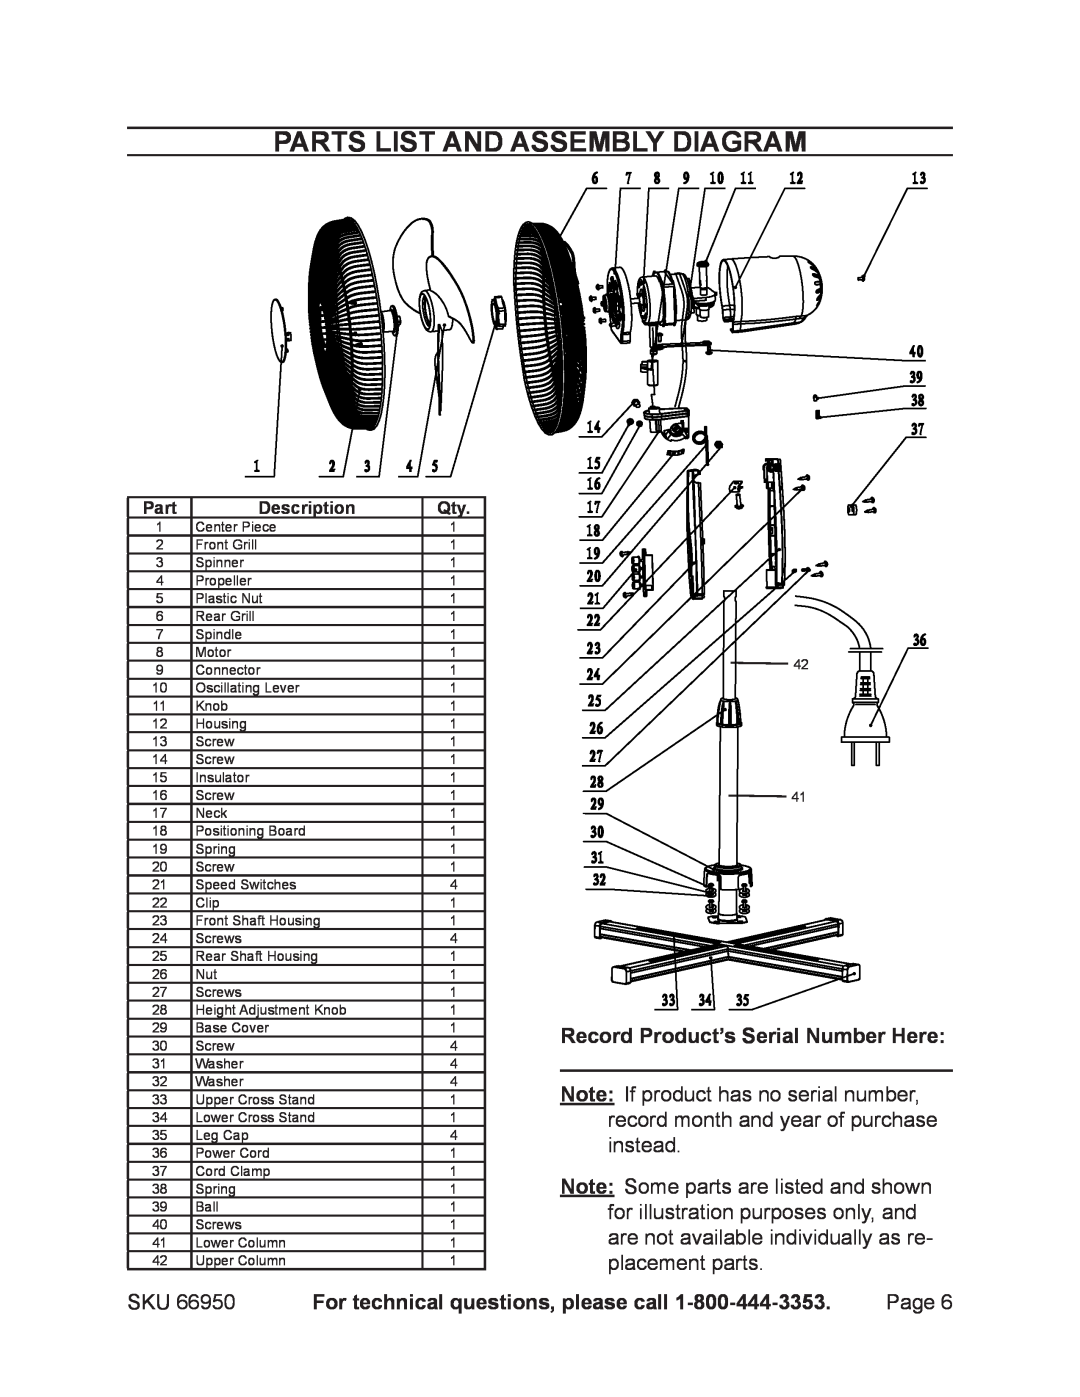 Harbor Freight Tools 66950 manual Parts List And Assembly Diagram, Record Product’s Serial Number Here, Description 